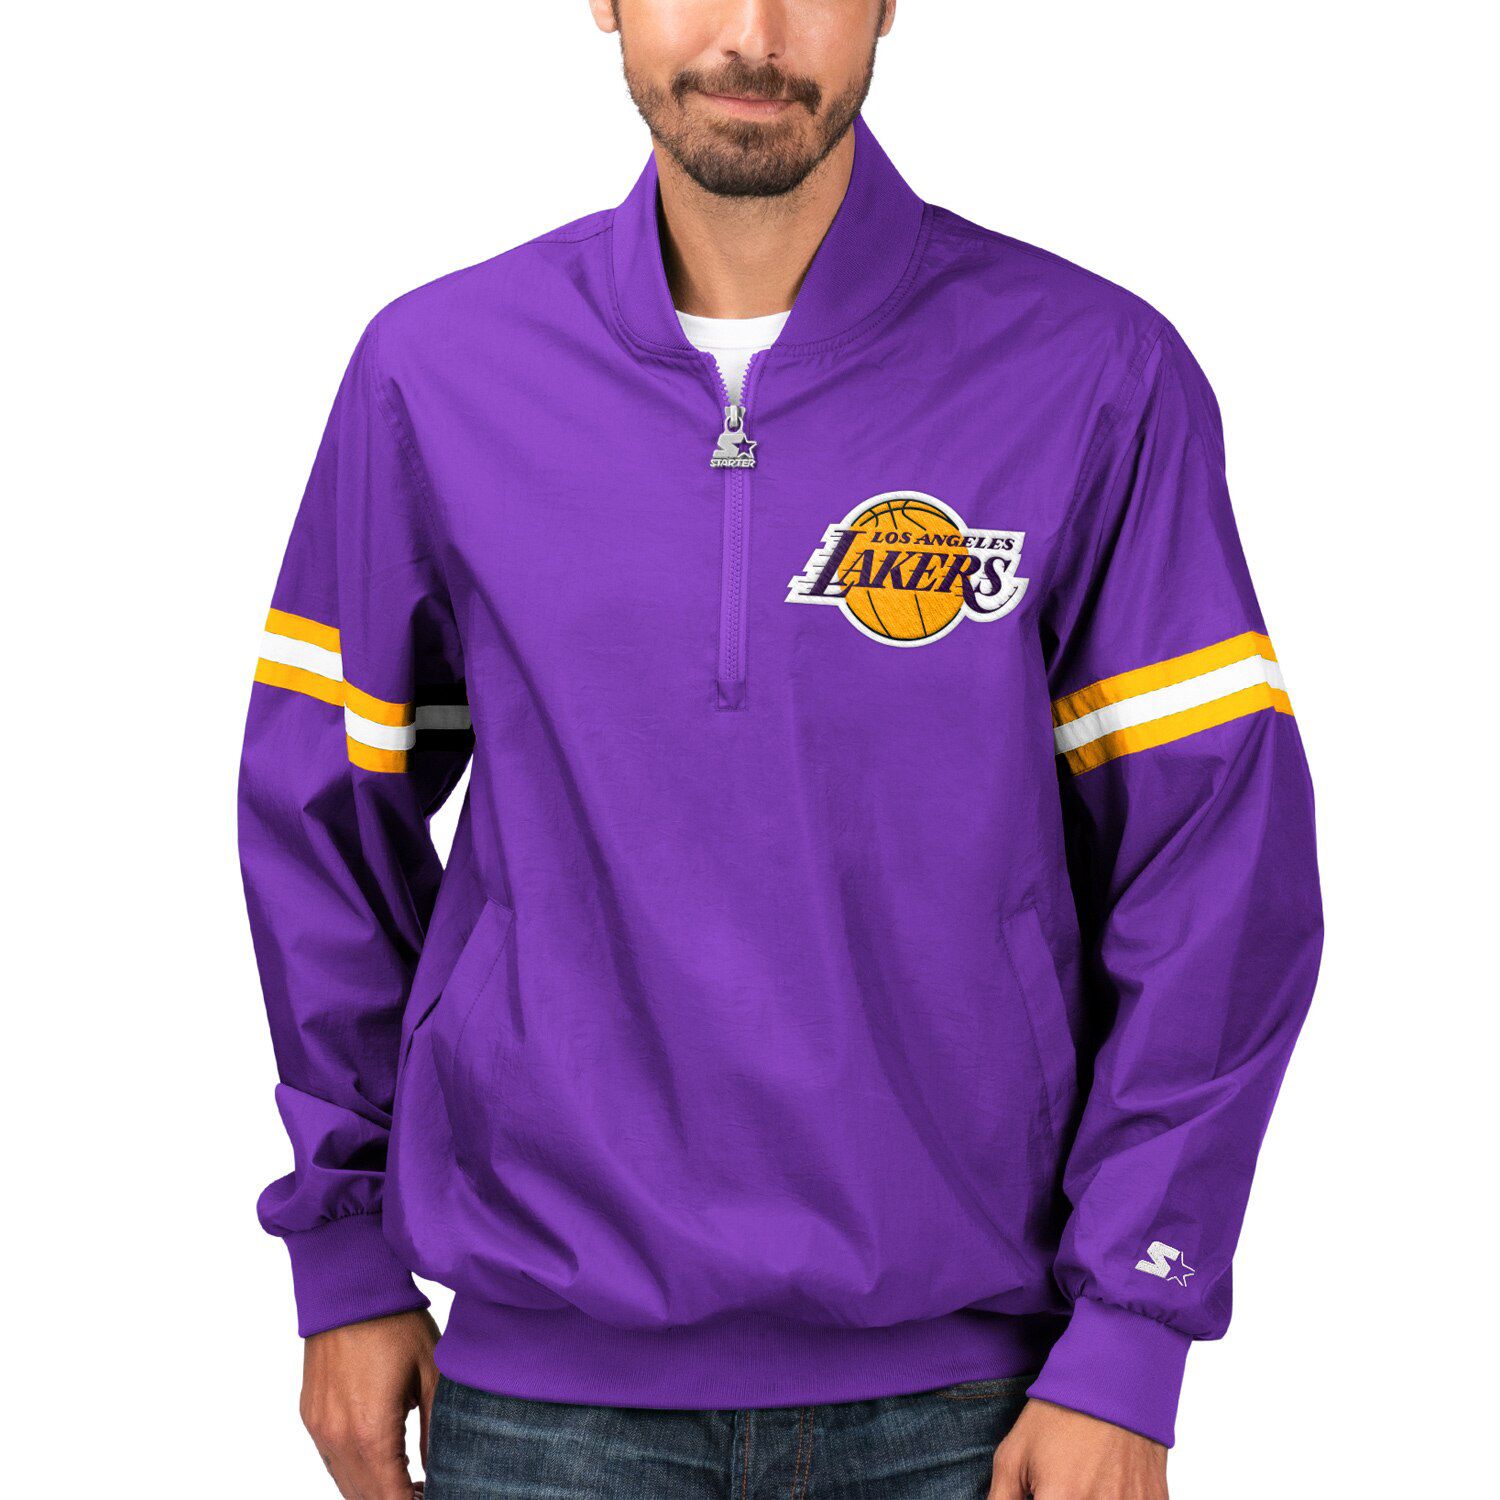 lakers pullover jacket